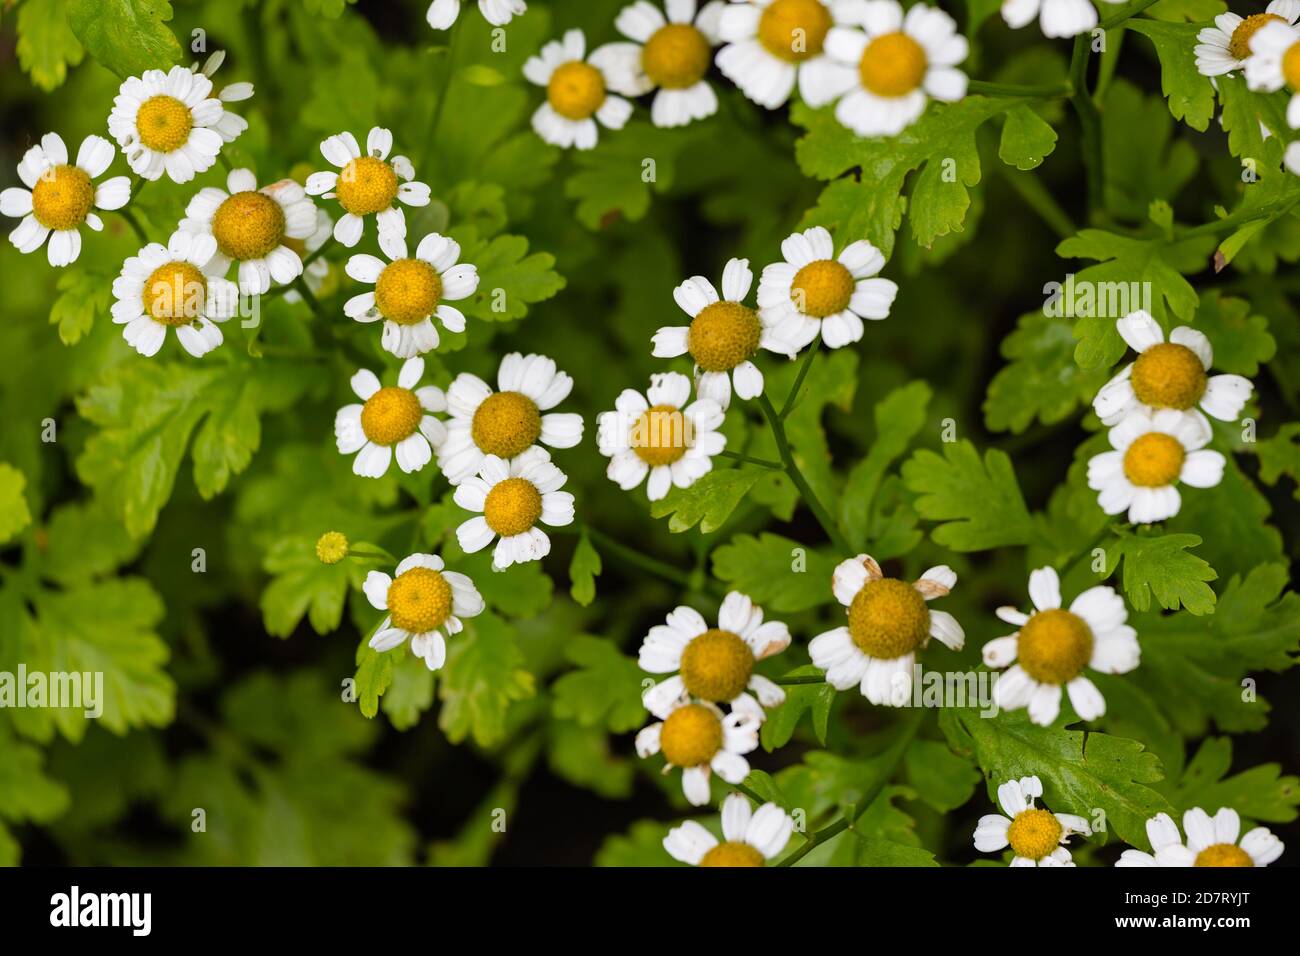 summer patern of small pyrethrum flowers growing in the garden Stock Photo